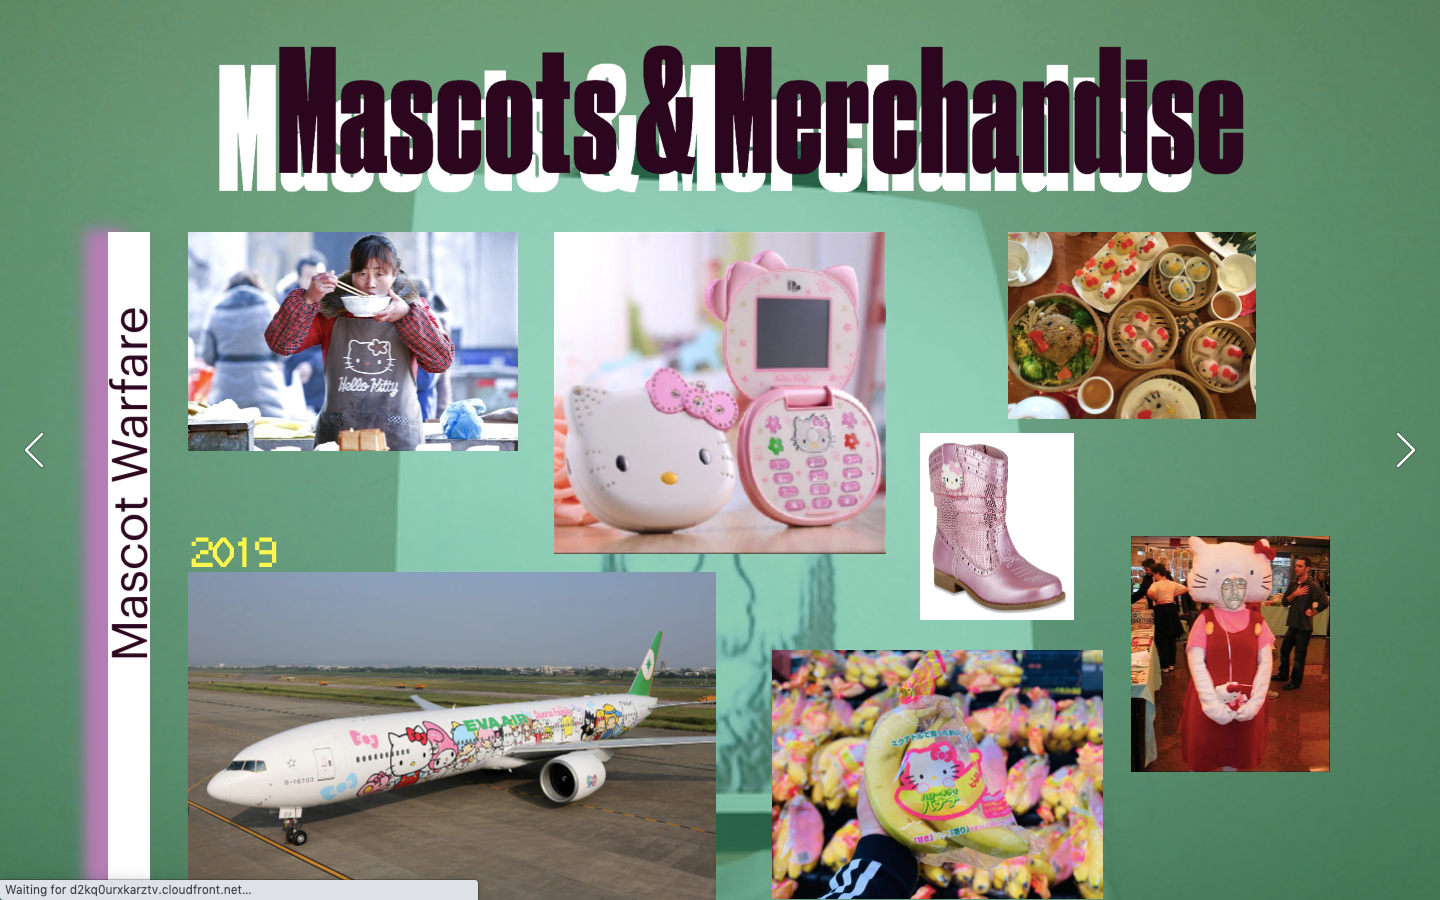 Mascots and Merchandise: a page with photos of someone in a Hello Kitty shirt, a Hello Kitty phone, plane, cowboy boots, bananas, dimsum, and someone in a Hello Kitty costume.